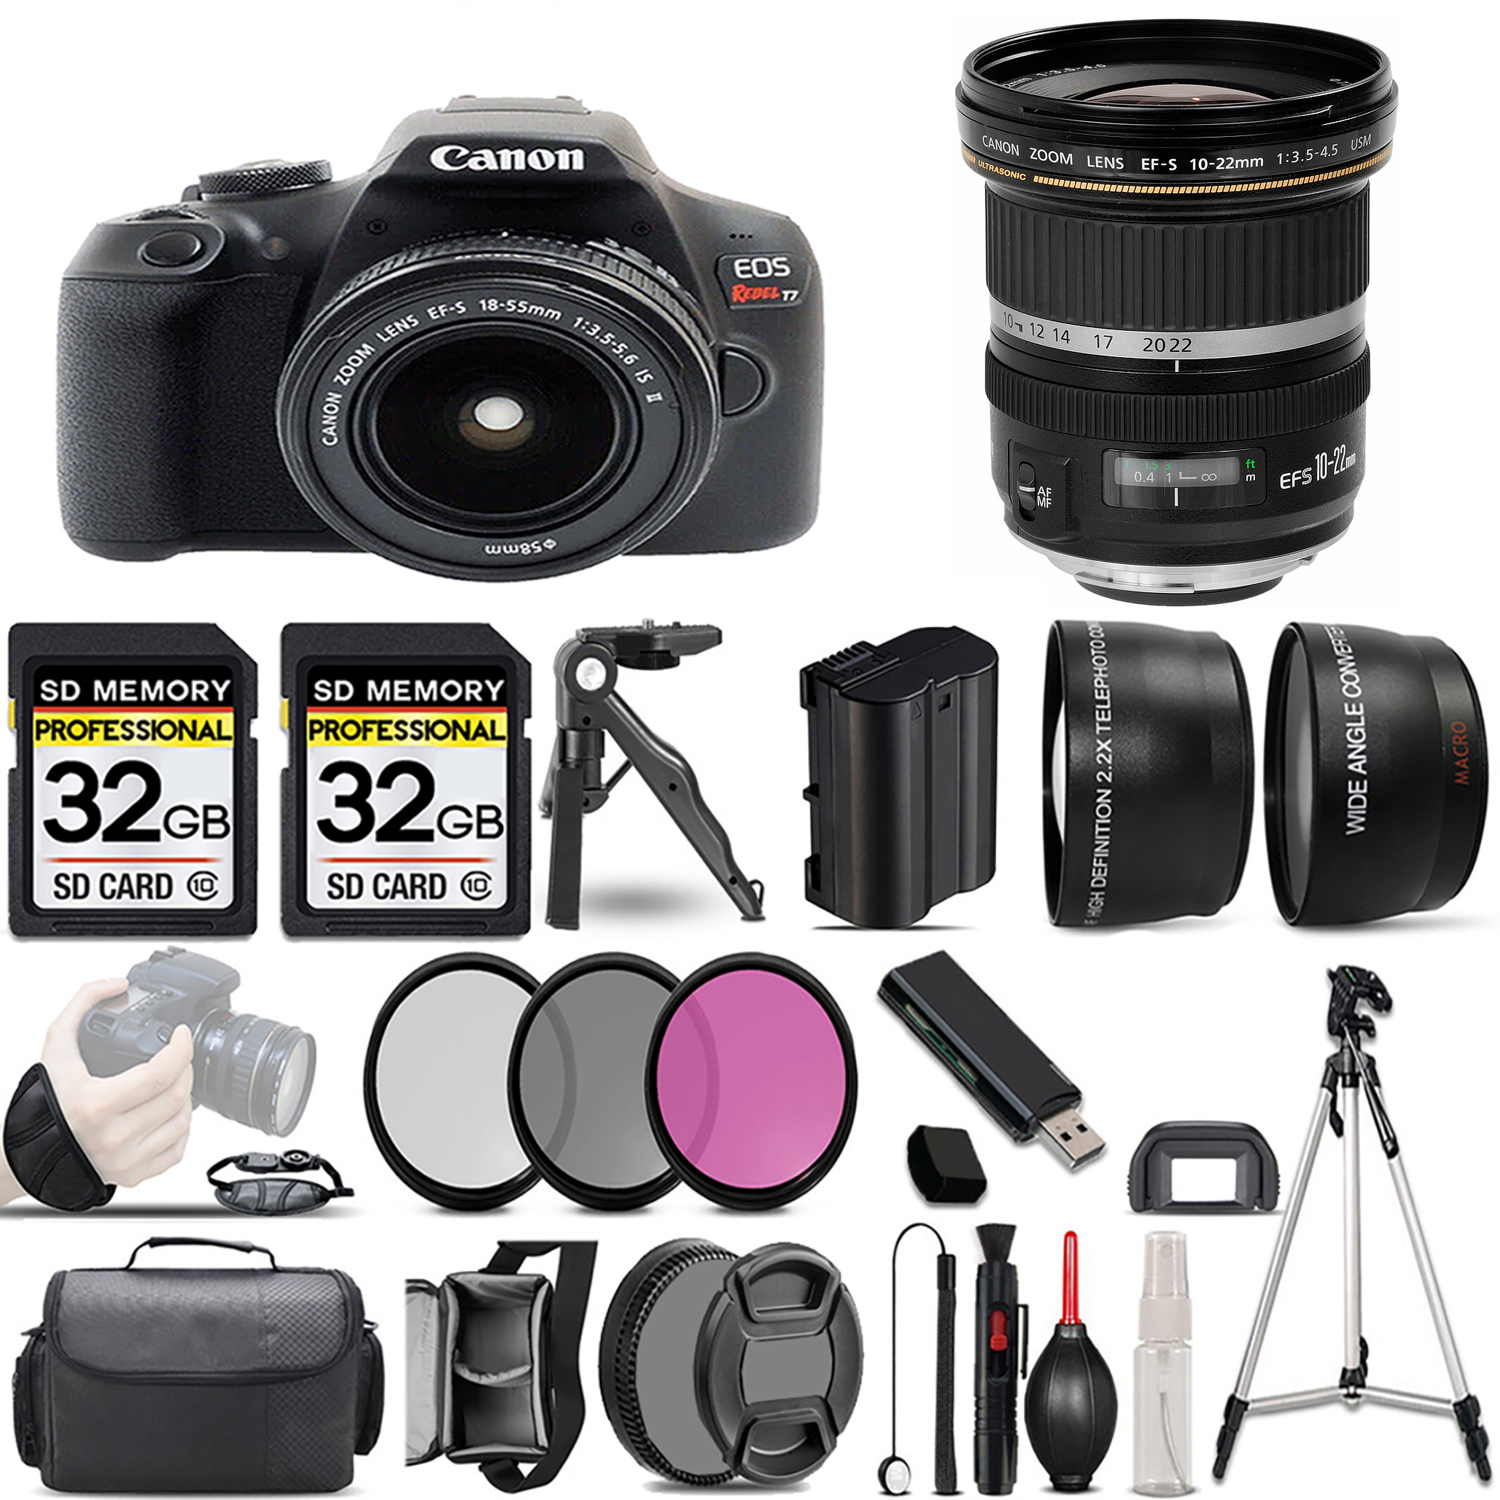 Rebel T7 with 18-55mm Lens + 10-22mm f/3.5- 4.5 USM Lens + 3 Piece Filter Set + 64GB *FREE SHIPPING*